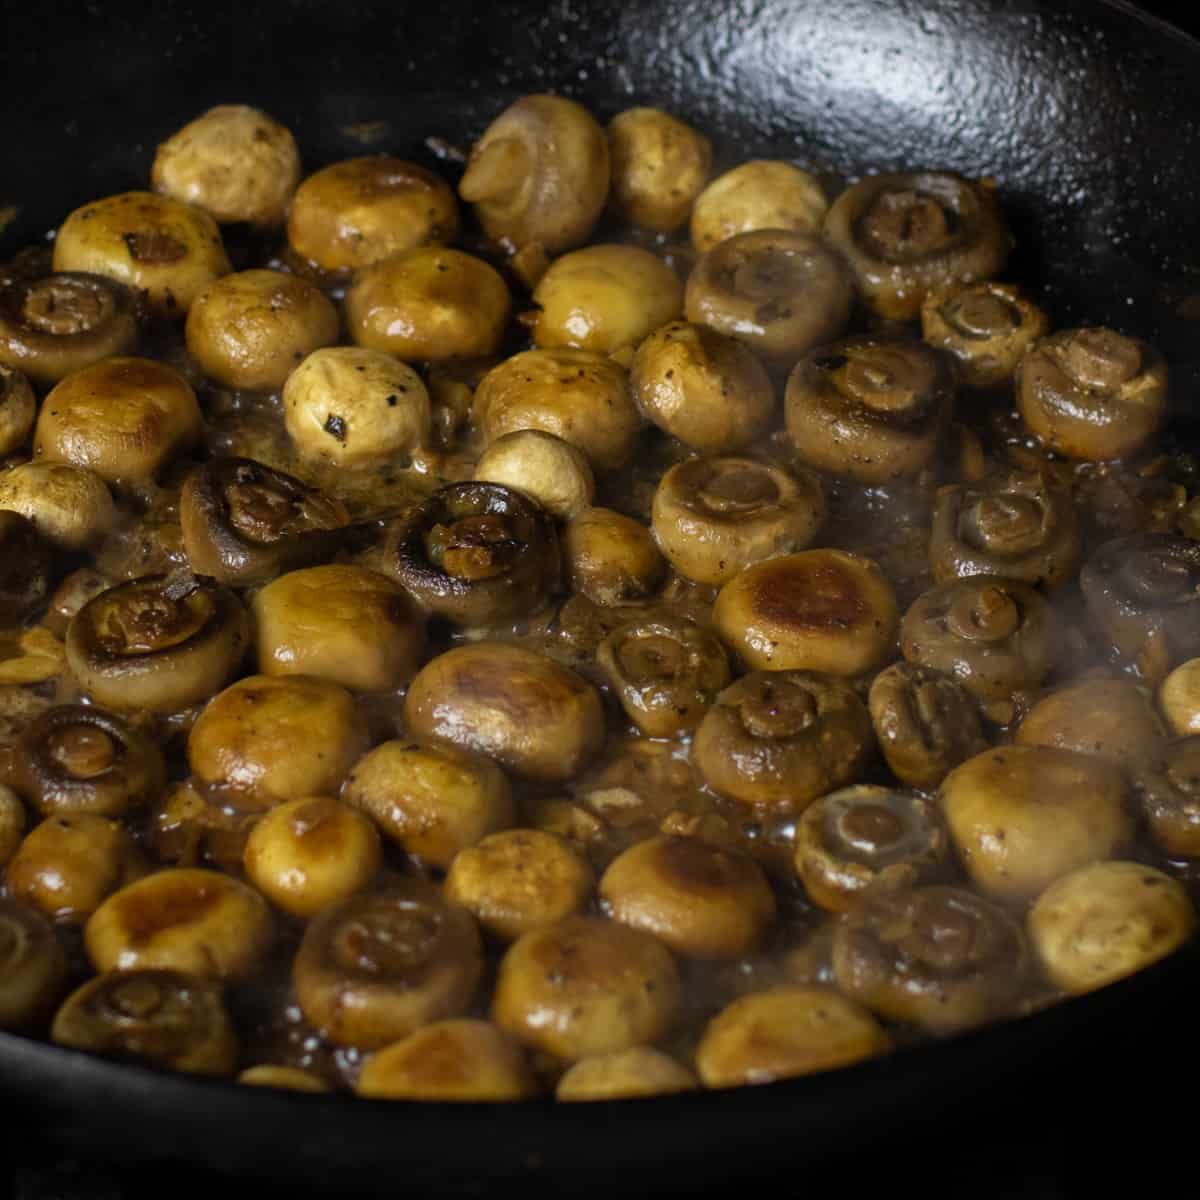 Cooked mushrooms ready to serve.